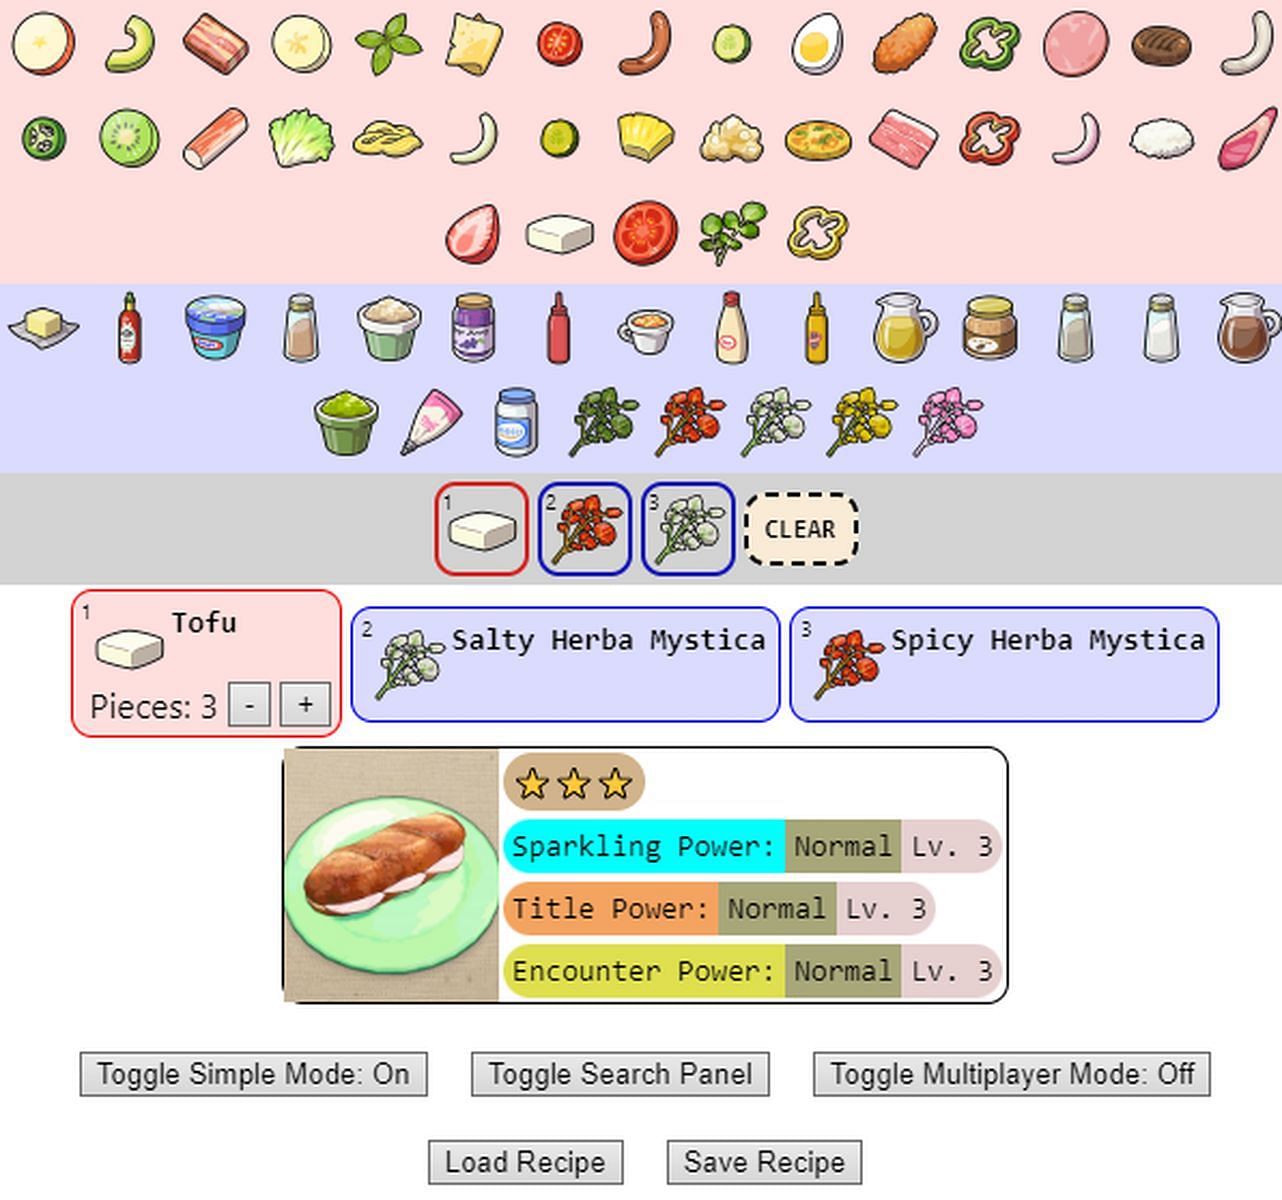 UNLIMITED Sparkling Power Sandwiches! No Herba Consumed & New Recipes -  Pokemon Scarlet and Violet 